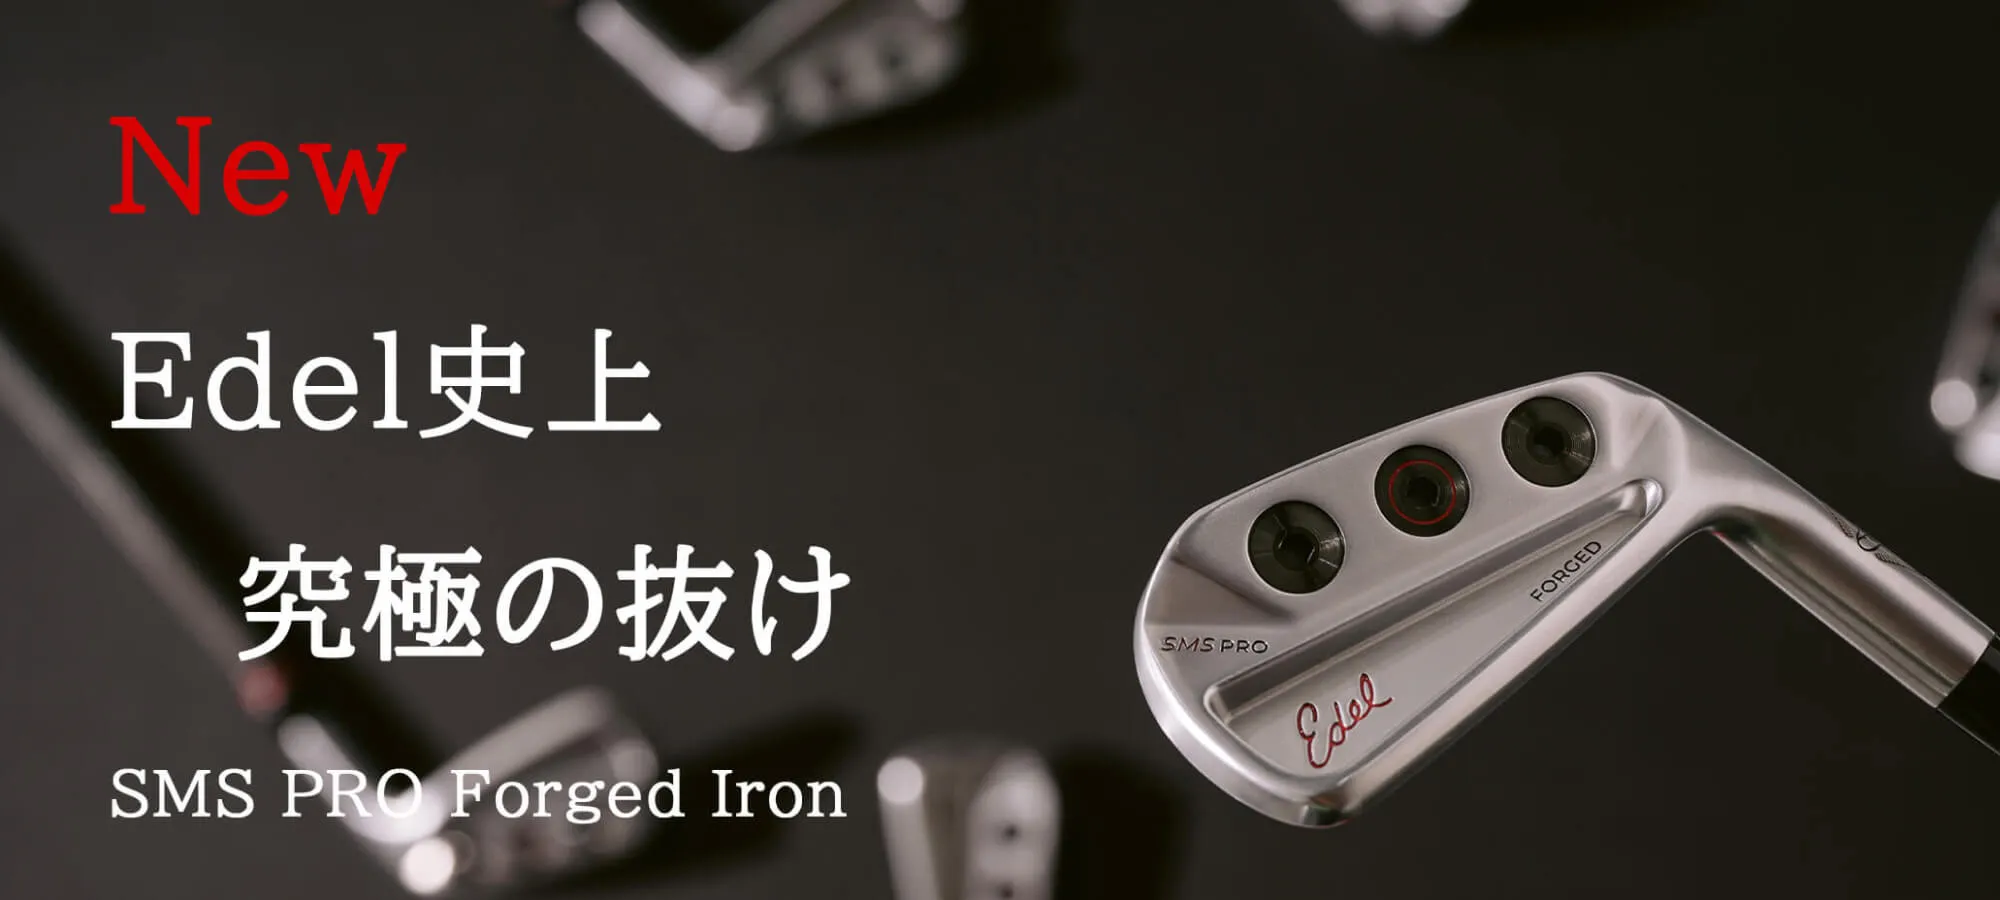 New Edel(イーデル)史上究極の抜け SMS PRO Forged Iron(エスエムエスプロフォージドアイアン)